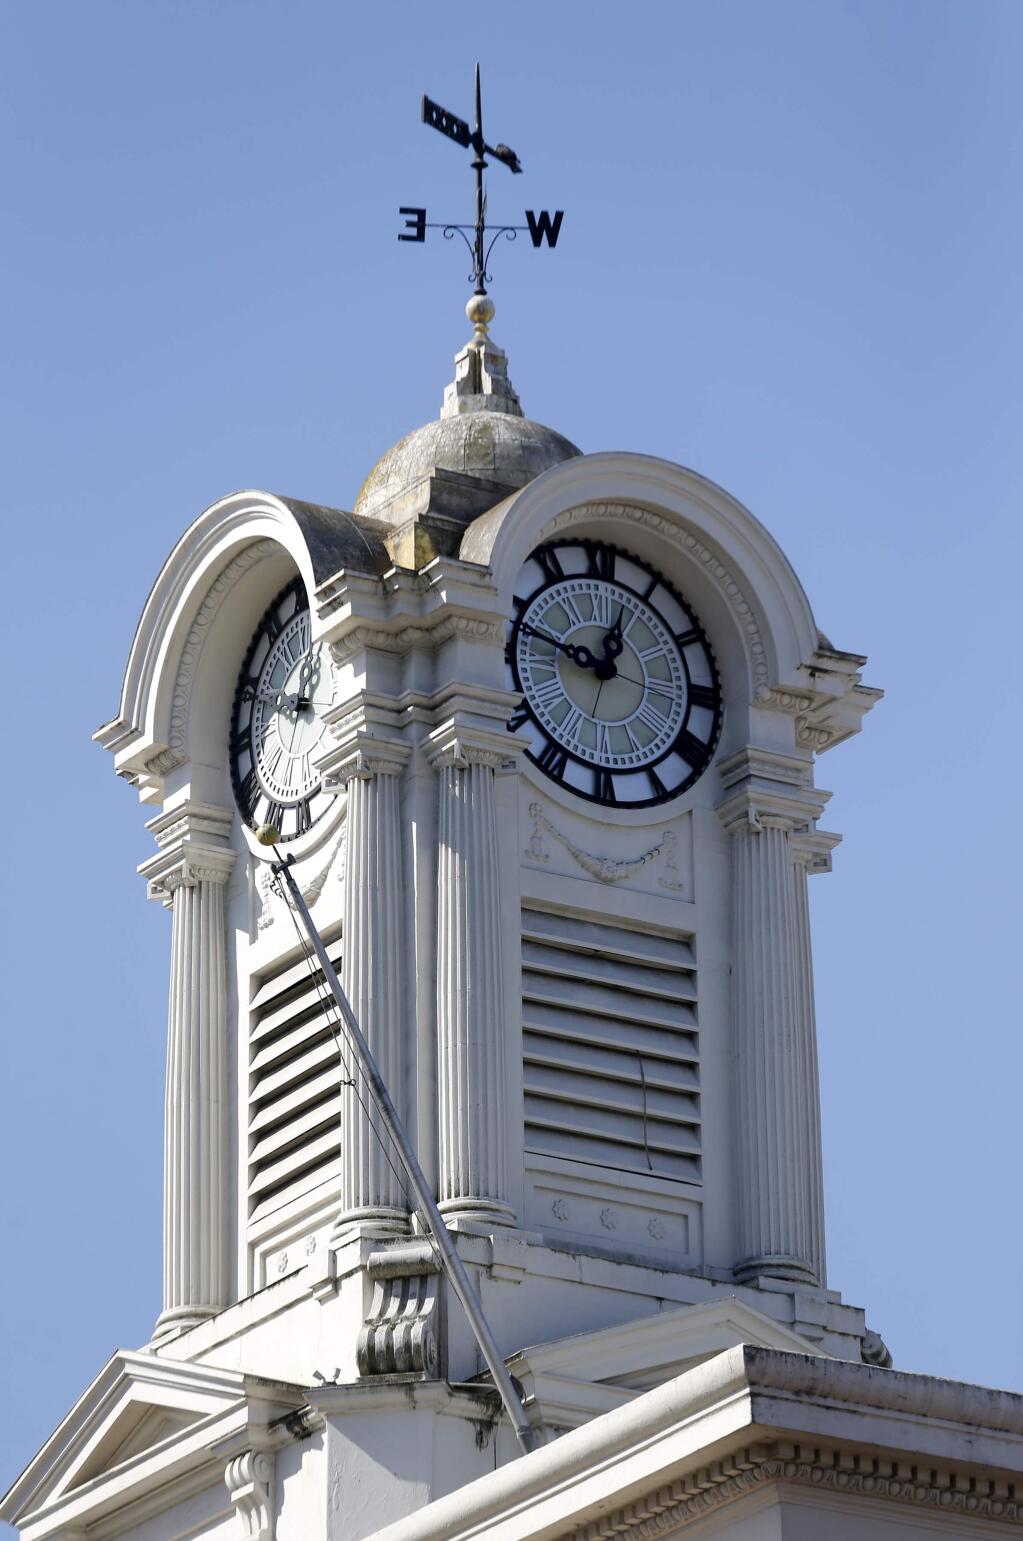 The clock tower of the Empire Building at Old Courthouse Square in Santa Rosa, on Thursday, June 30, 2016. (BETH SCHLANKER/ The Press Democrat)